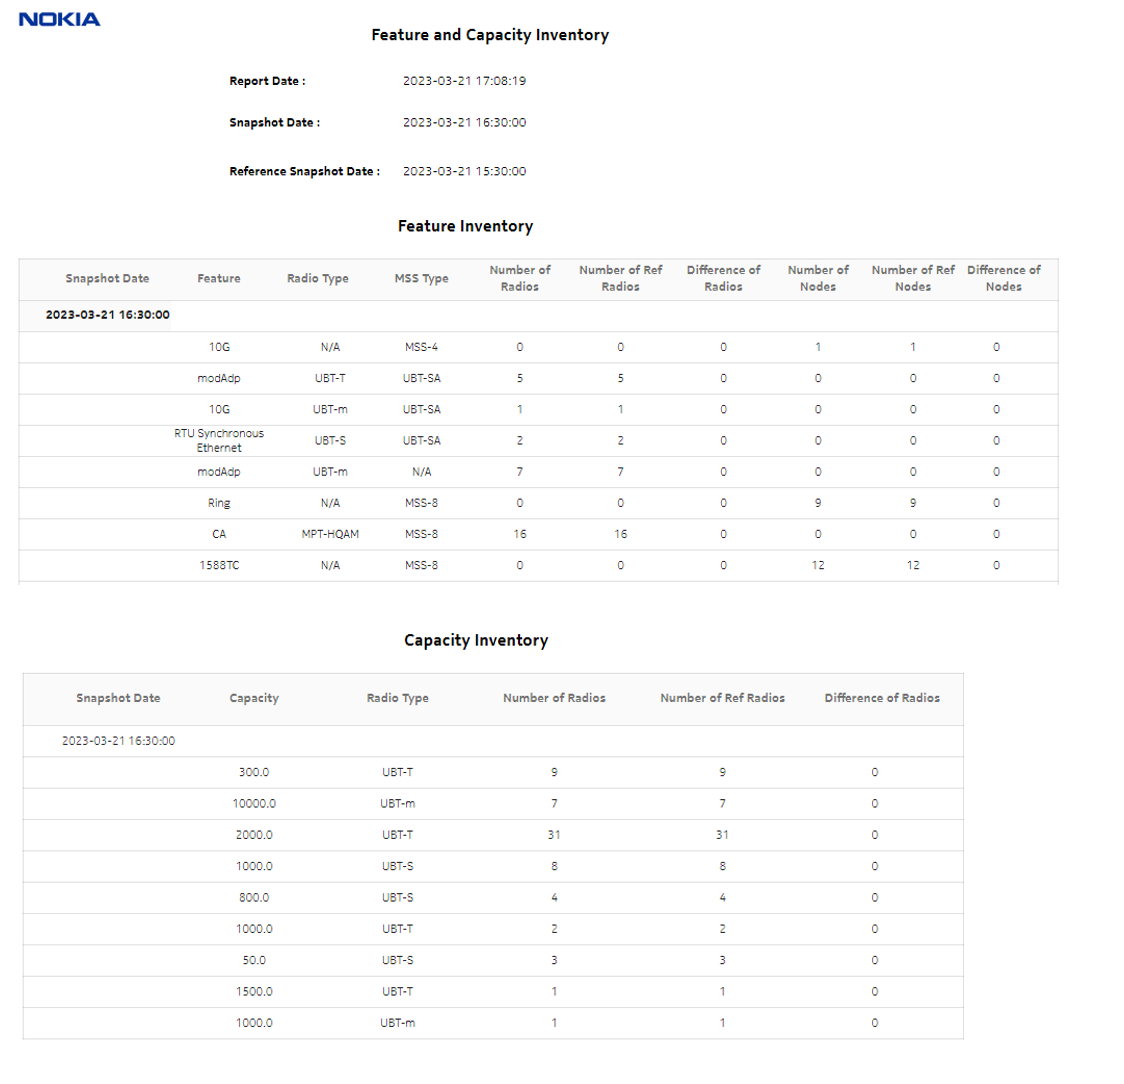 Feature and Capacity Inventory report with reference snapshot